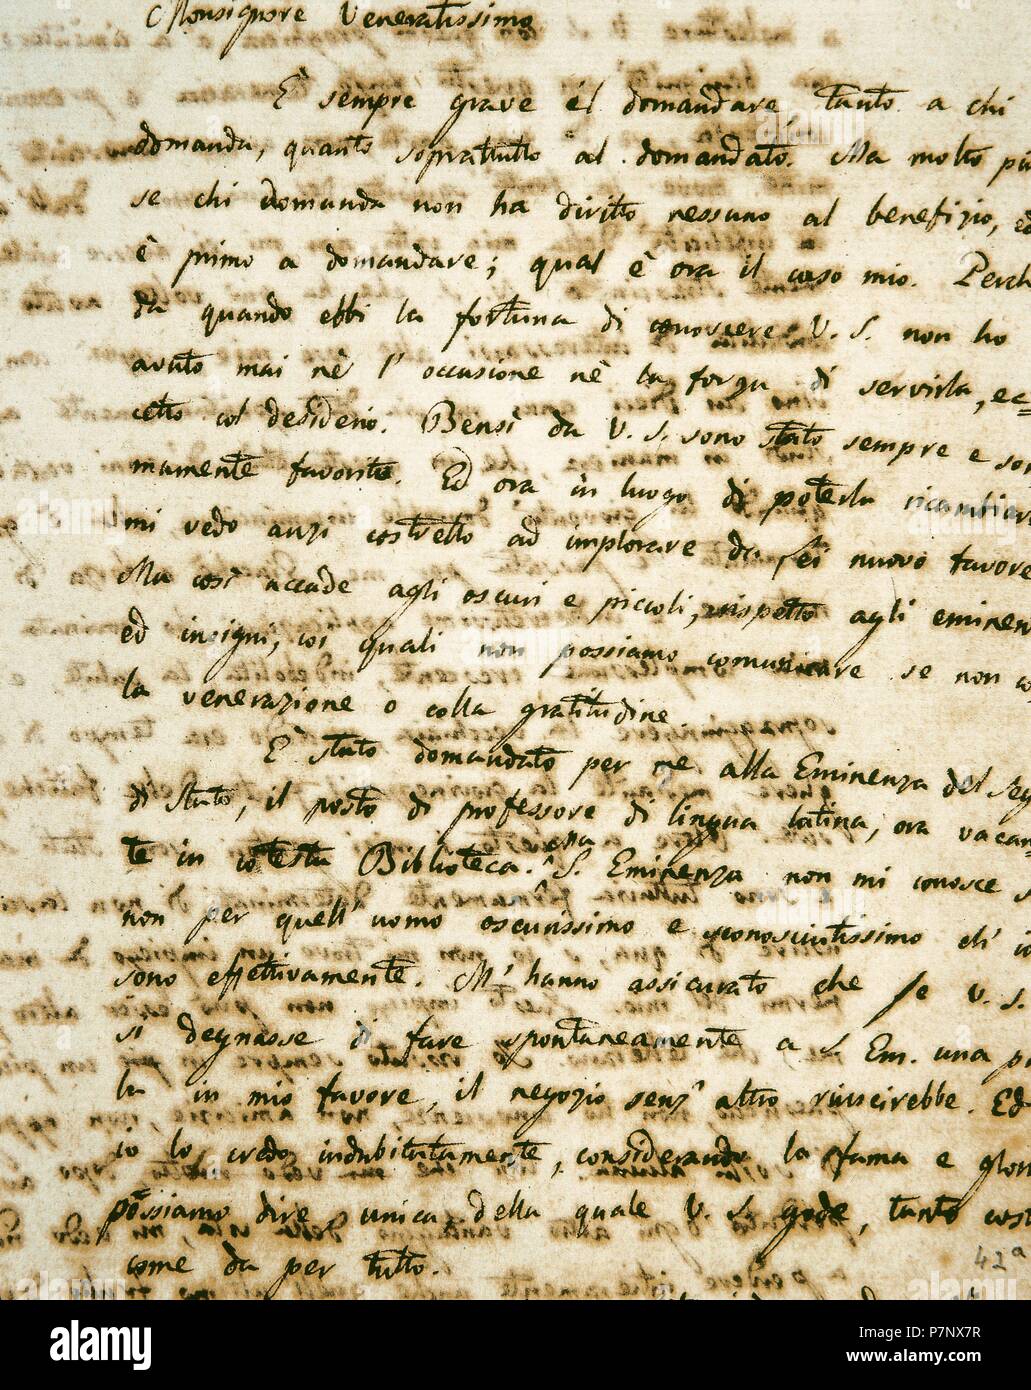 Giacomo Leopardi (1798-1837). Italian philosopher and poet. Handwritten letter to Monsignor Angelo Mai, first Guardian of the Vatican Library, Folio 42r, 1821. Vatican Apostolic Library. Vatican City. Stock Photo